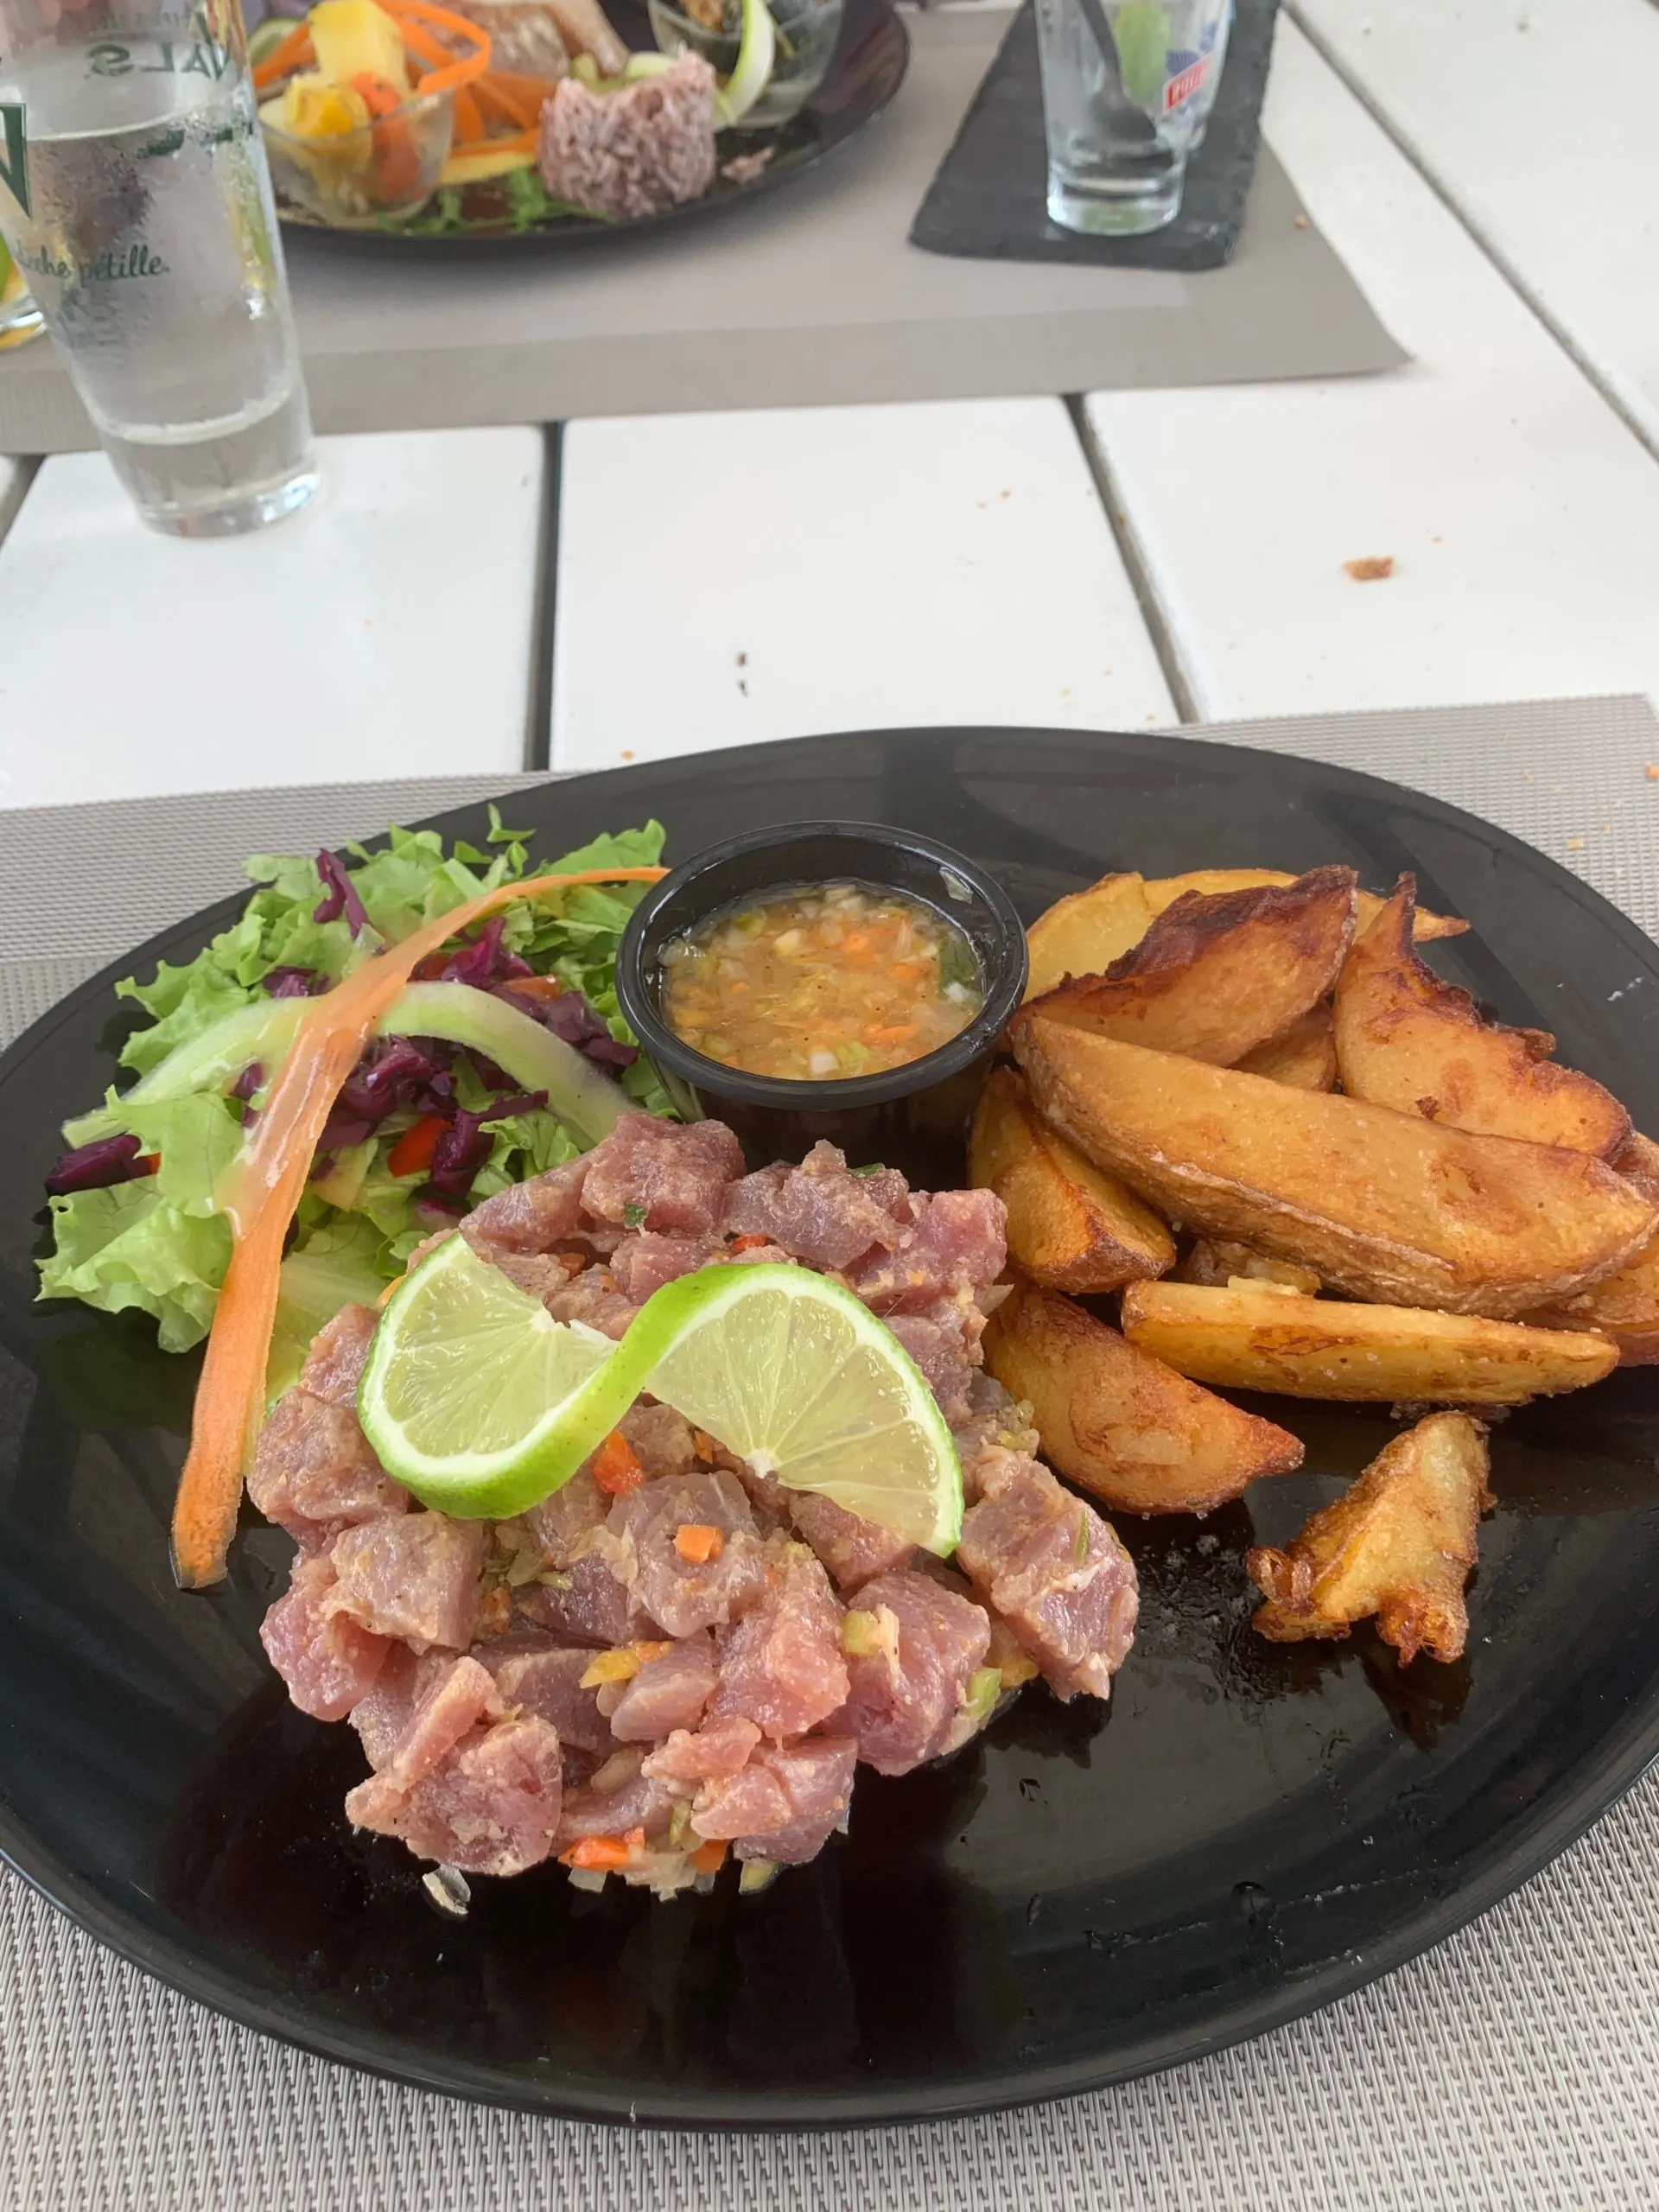 Marlin tartar with french fries and a small salad at Le Voile Blanche in Le Diamant